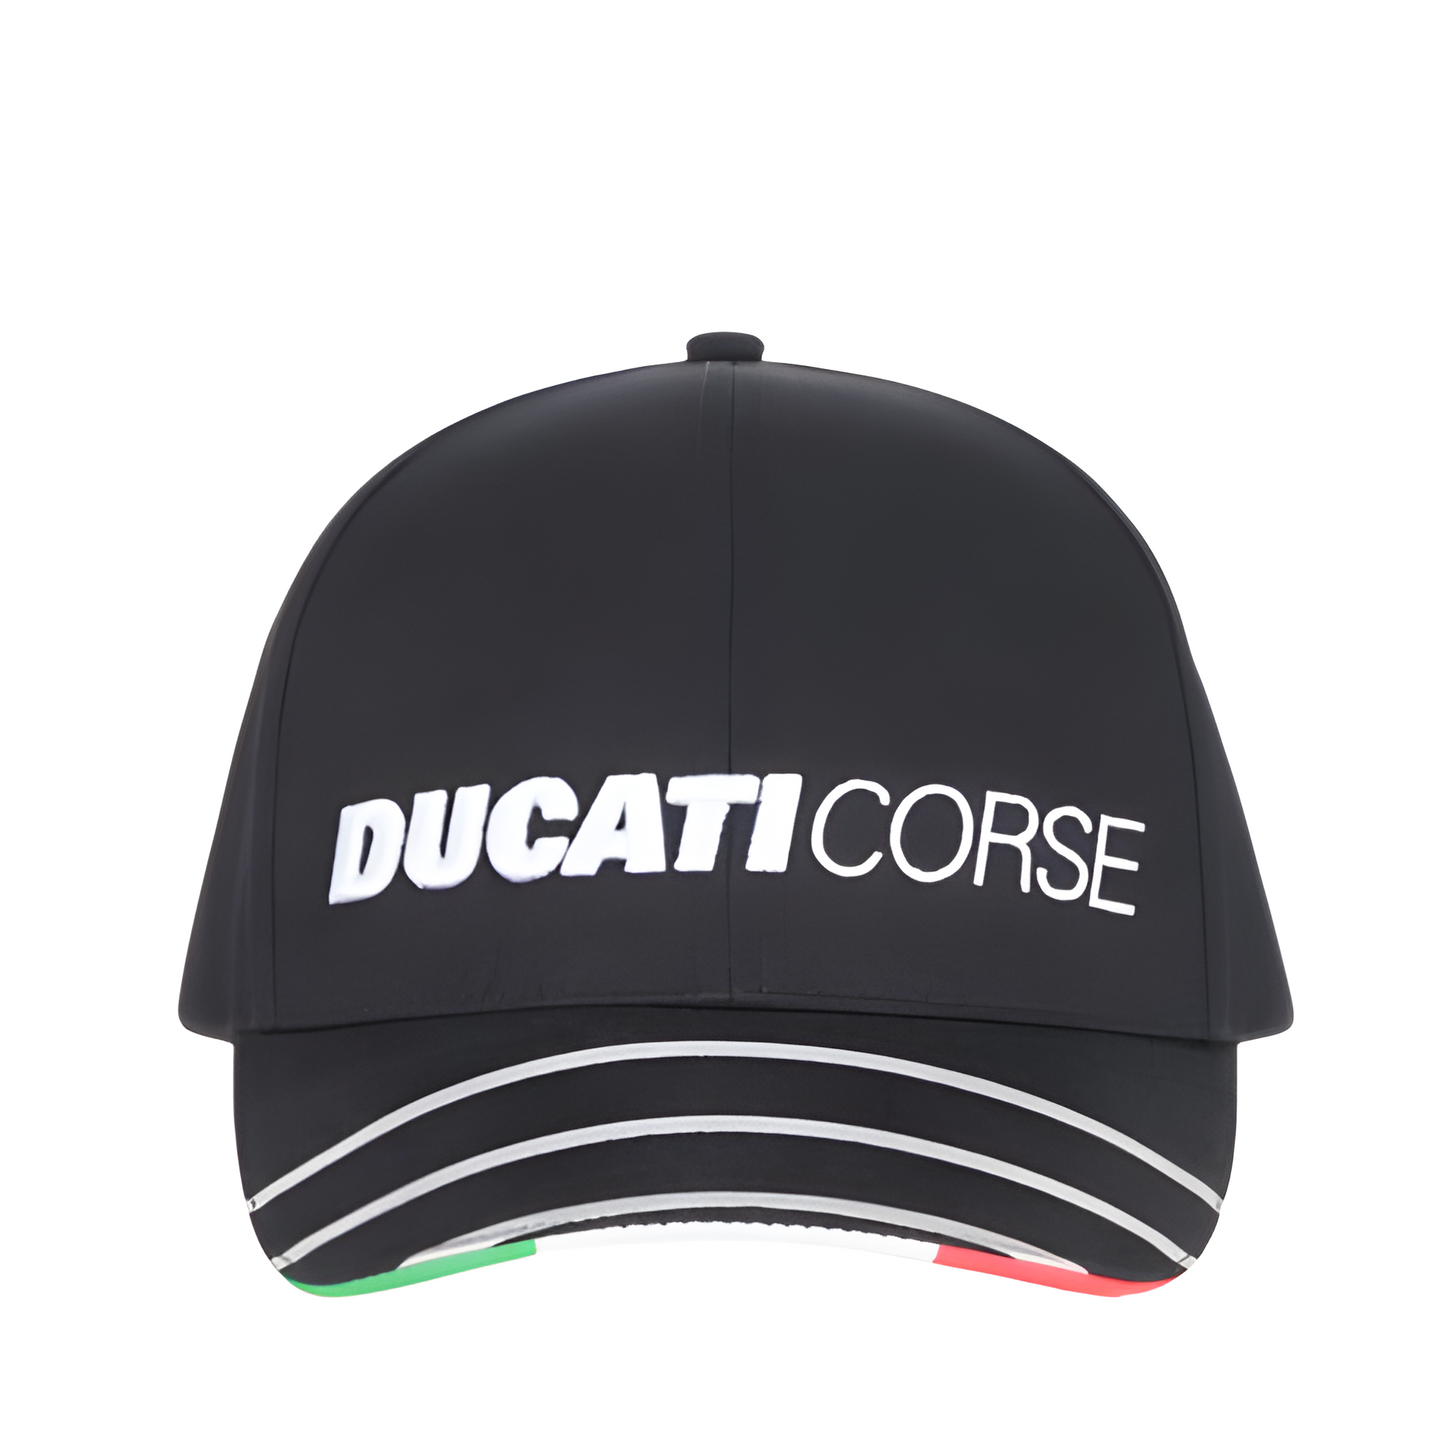 Ducati cap, F1, Ducati Corse, F1 accessories, F1, take a lot, men clothing, racegear, Mr price clothing, hats, caps, branded hats, brand caps, best seller, online store, mens hats